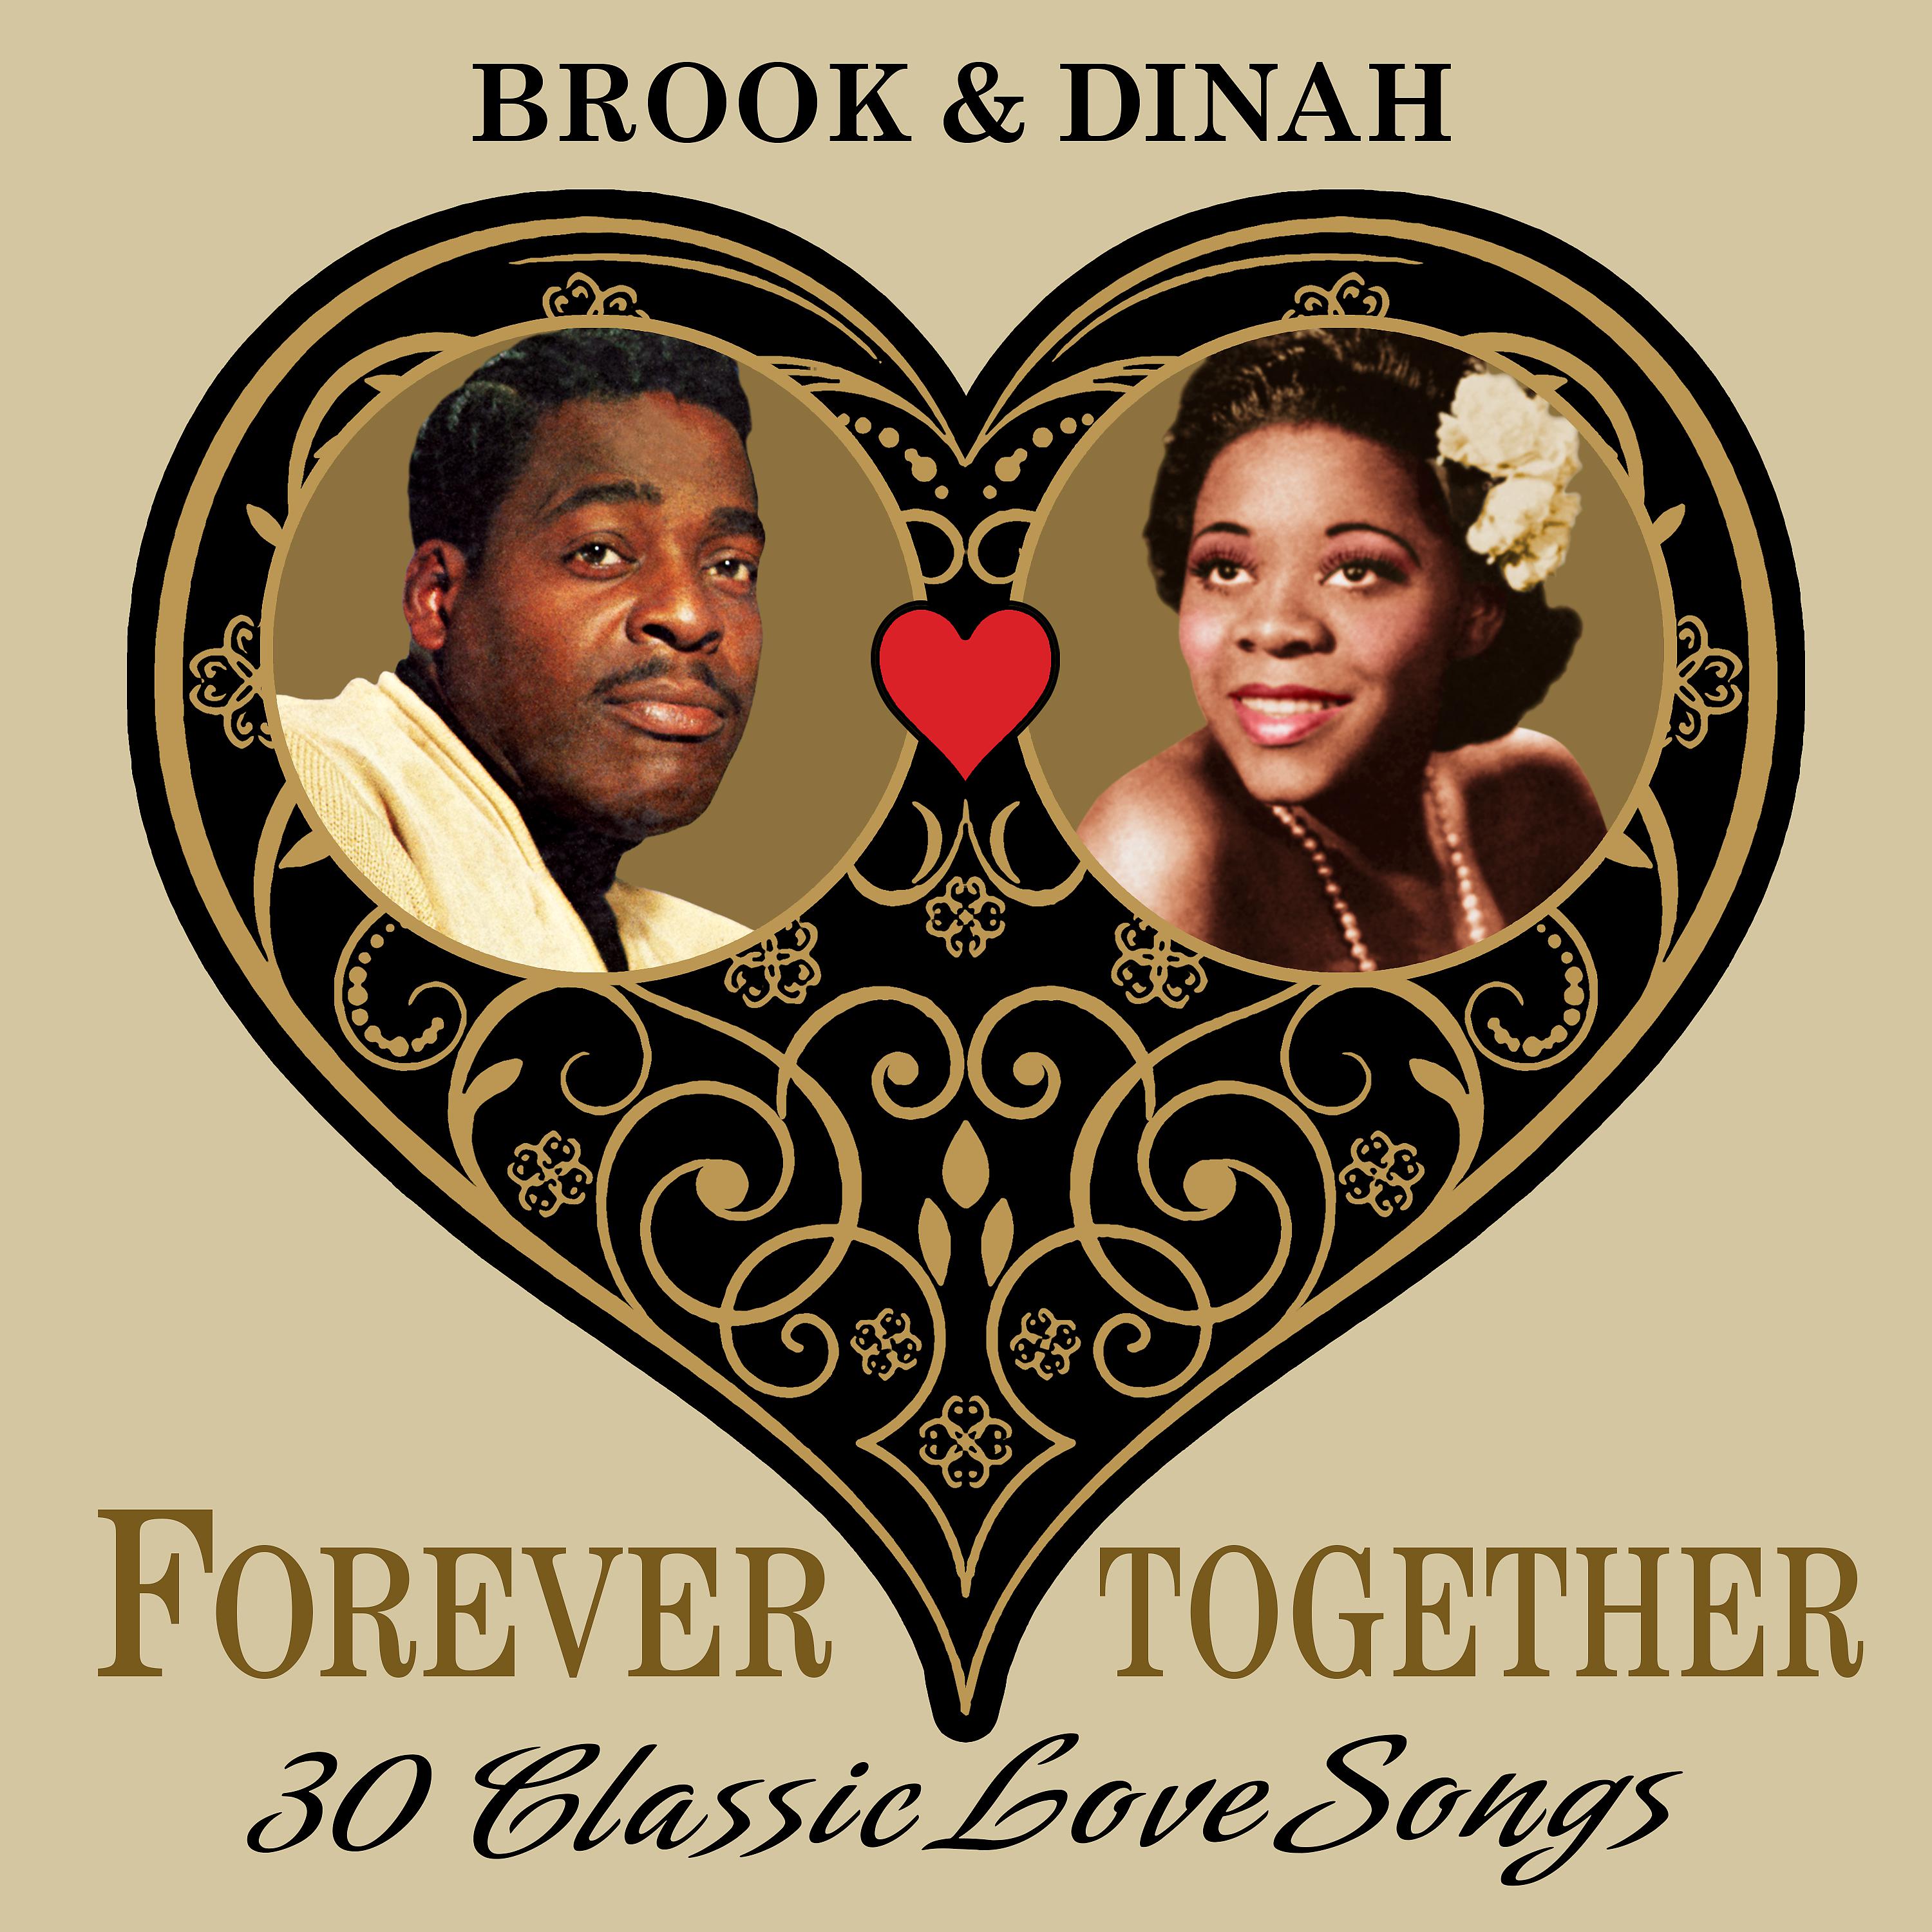 Постер альбома Brook & Dinah (Forever Together) 30 Classic Love Songs